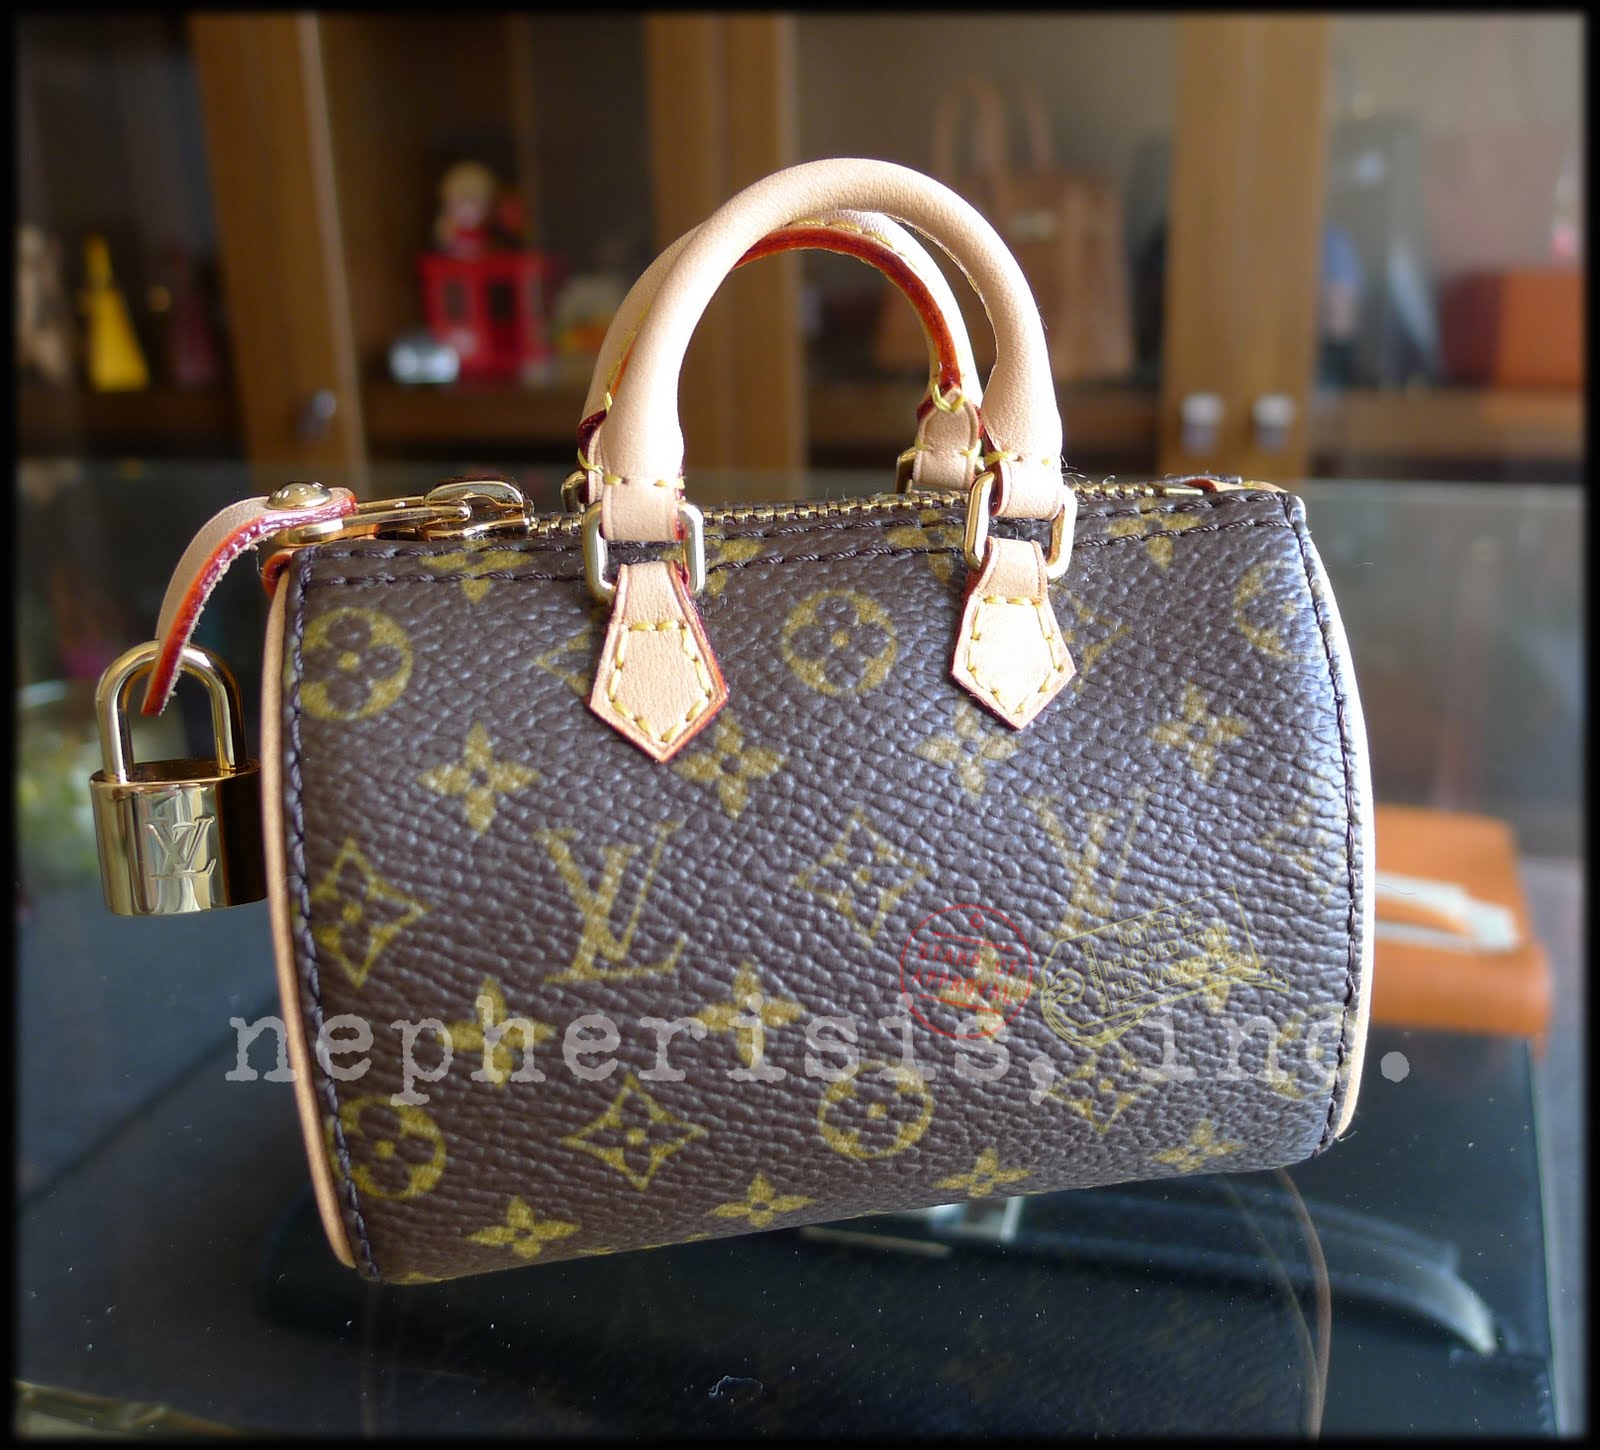 nepherisis, inc. - for the love of authentic luxury handbags and accessories!: Louis Vuitton ...